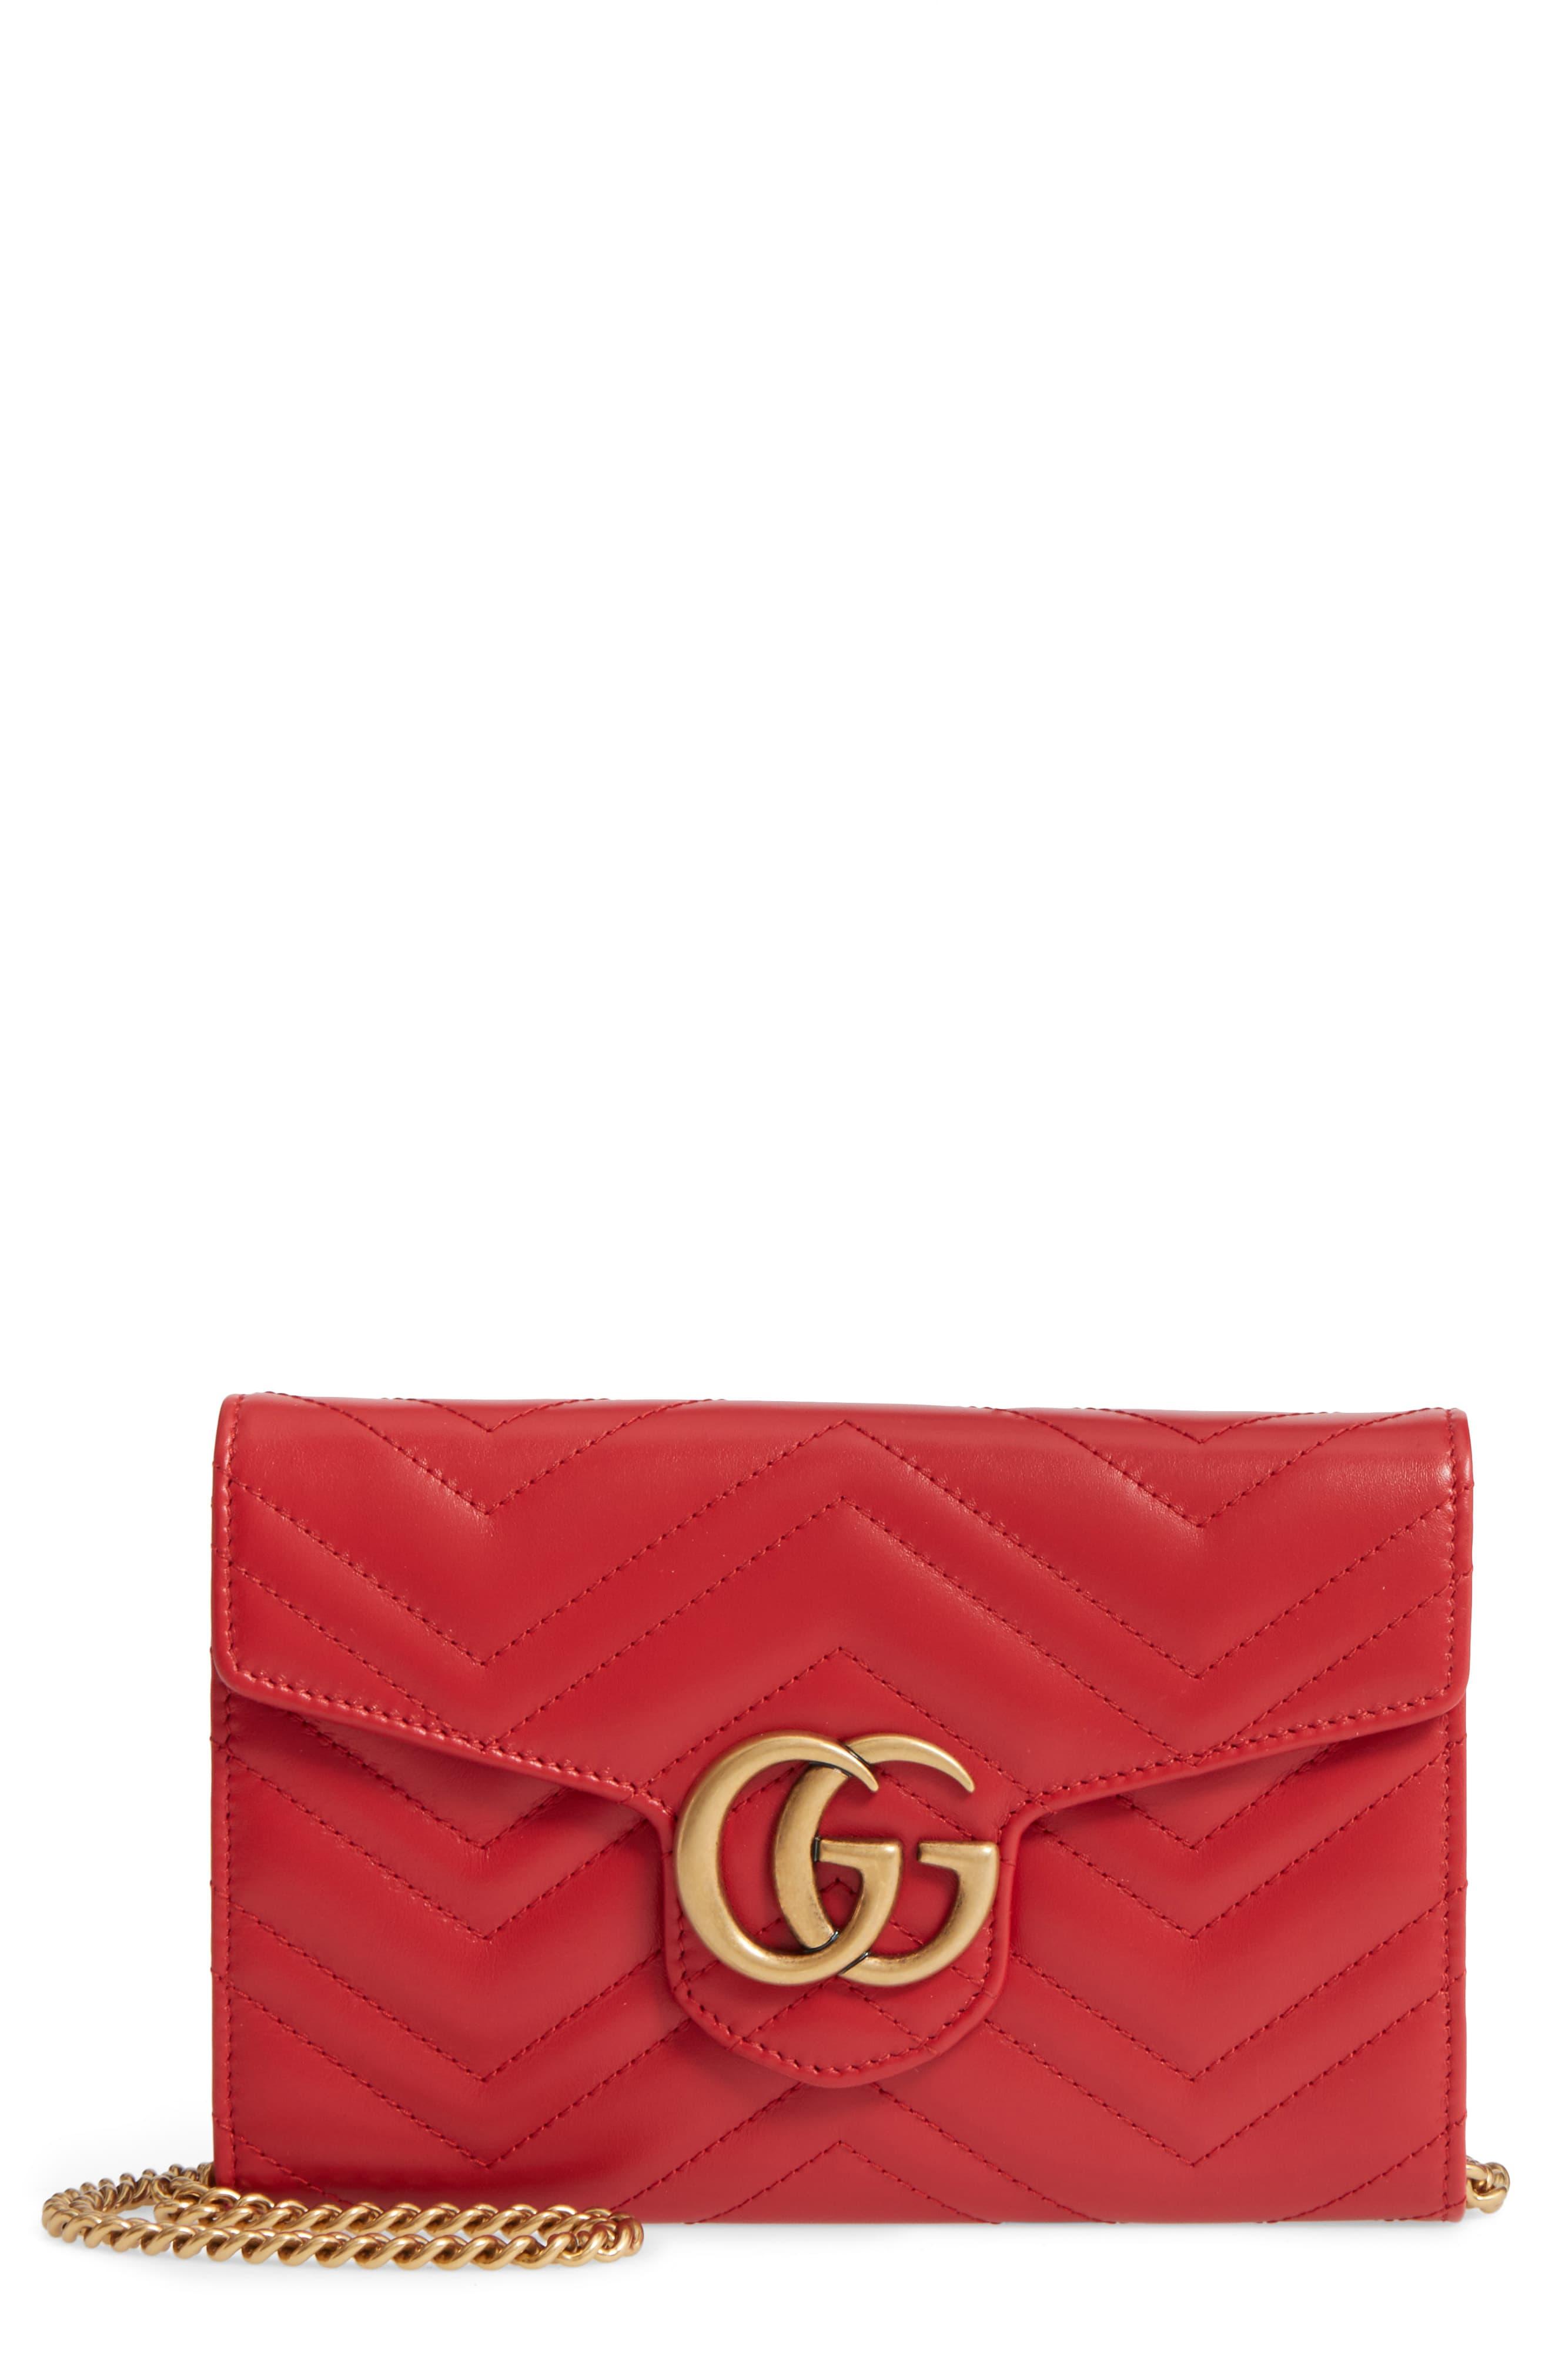 Gucci Gg Marmont 2.0 Matelassé Leather Wallet On A Chain in Red - Lyst